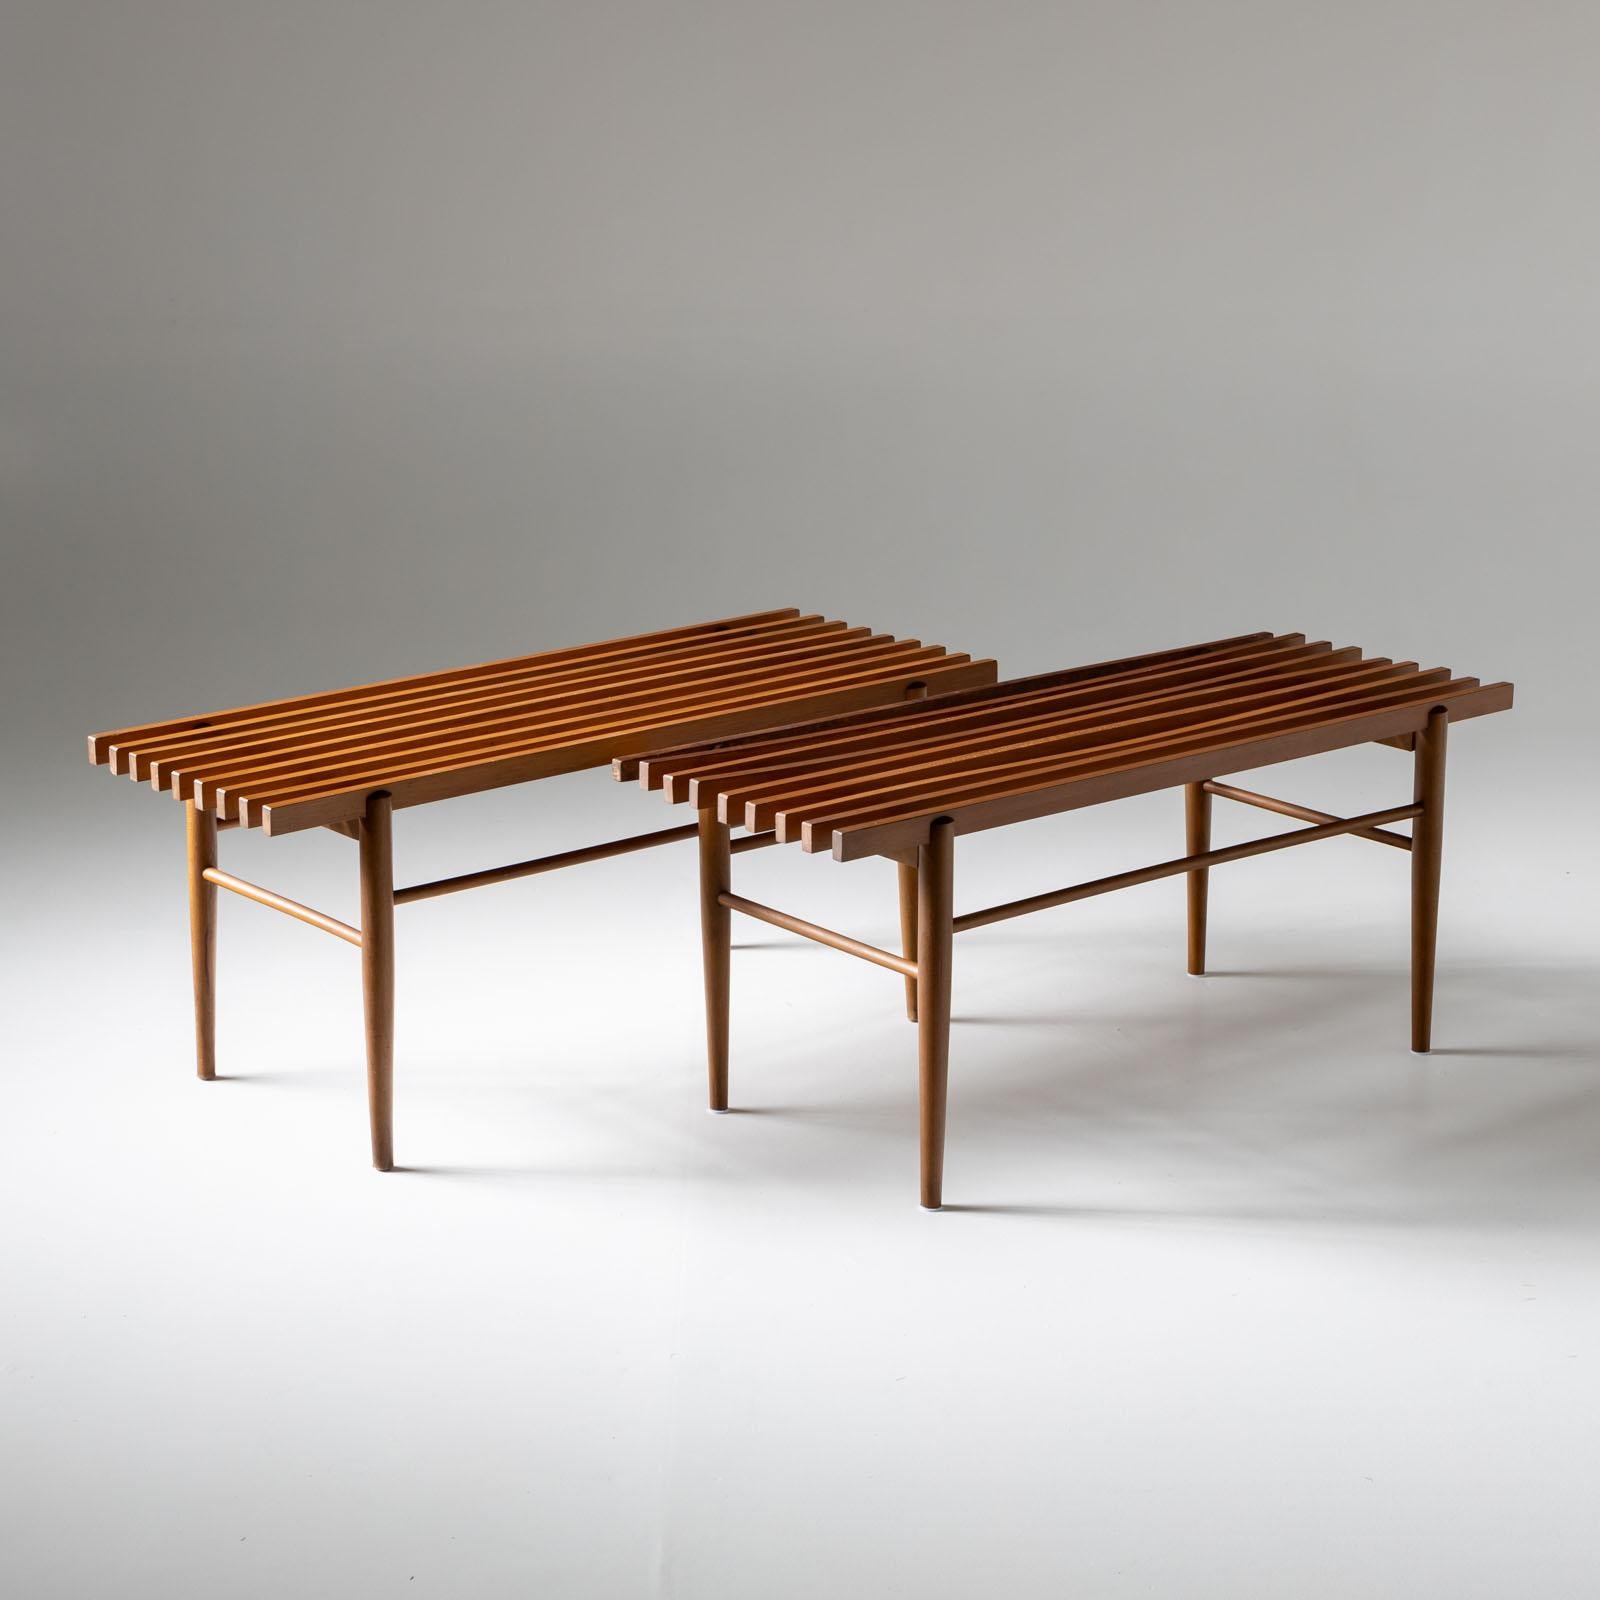 Pair of benches on conical legs with smooth connecting struts and seats made of square slats.